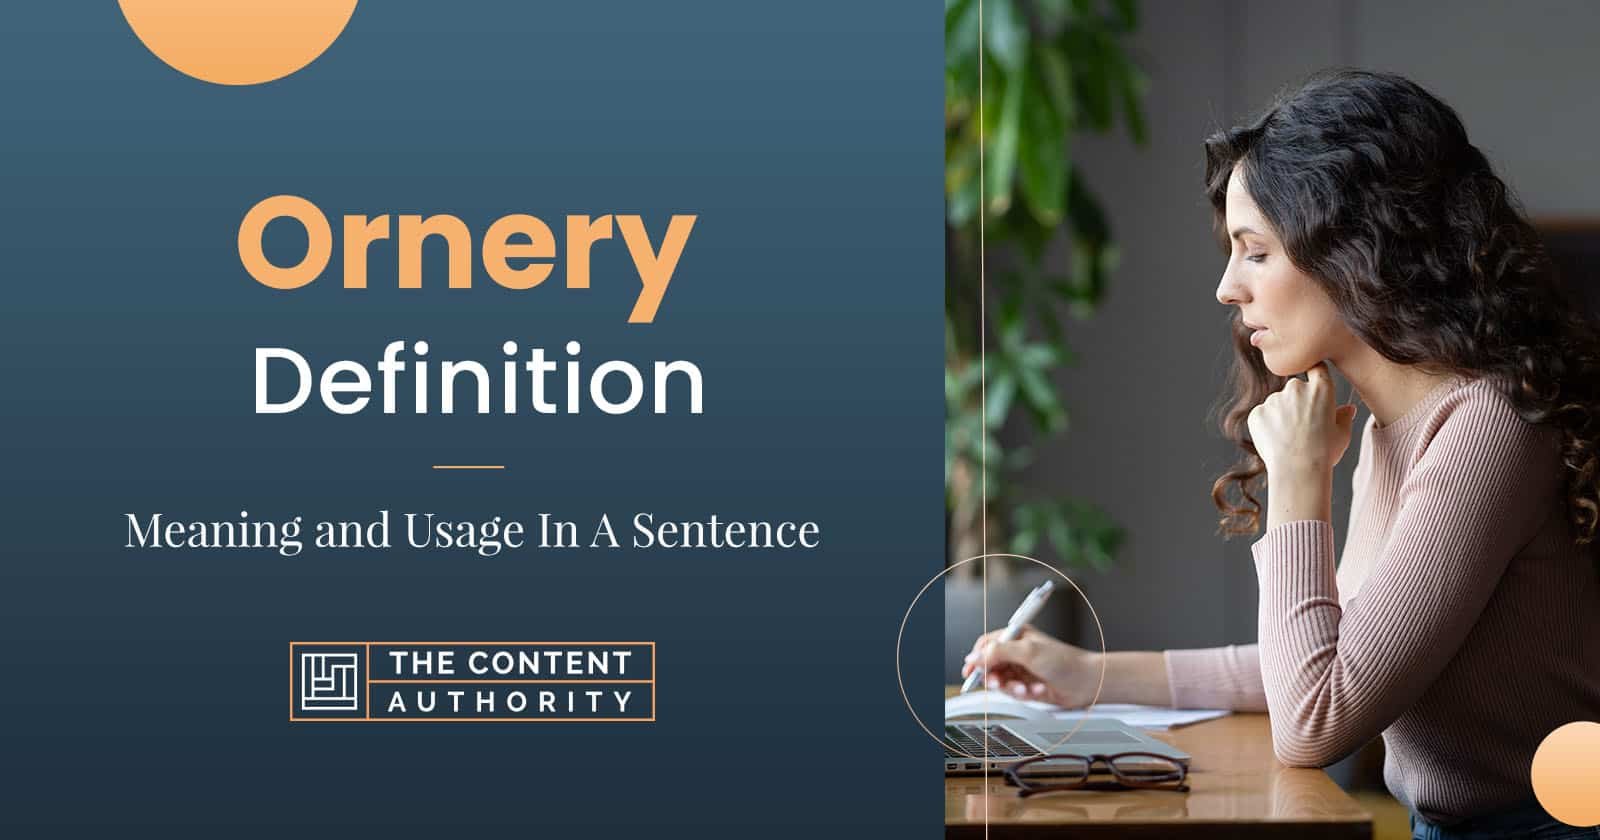 Ornery Definition – Meaning and Usage In A Sentence